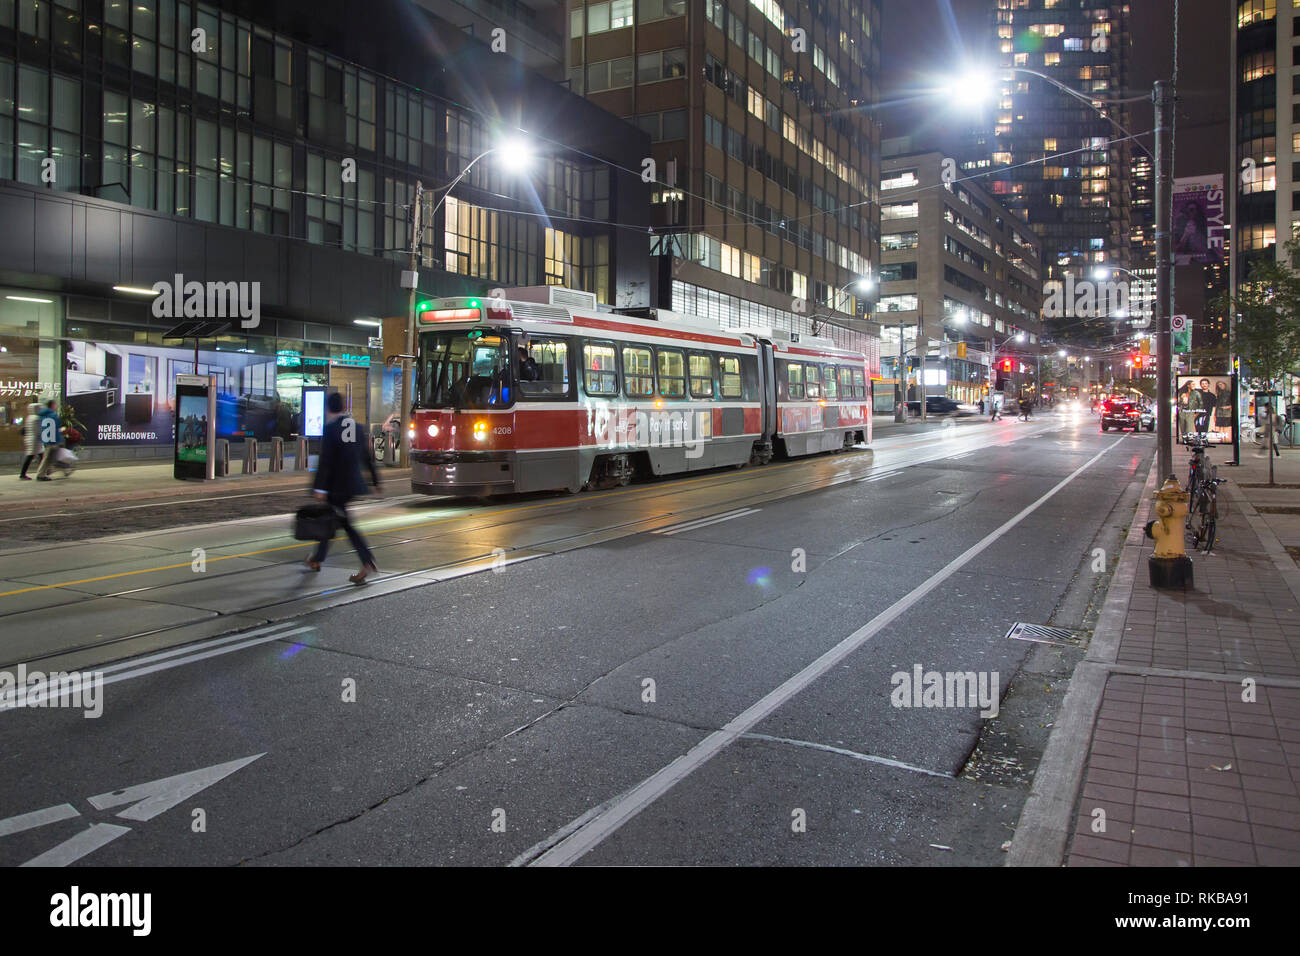 A banker crosses Bay Street as night falls on downtown Toronto. A streetcar waits on the road. Stock Photo